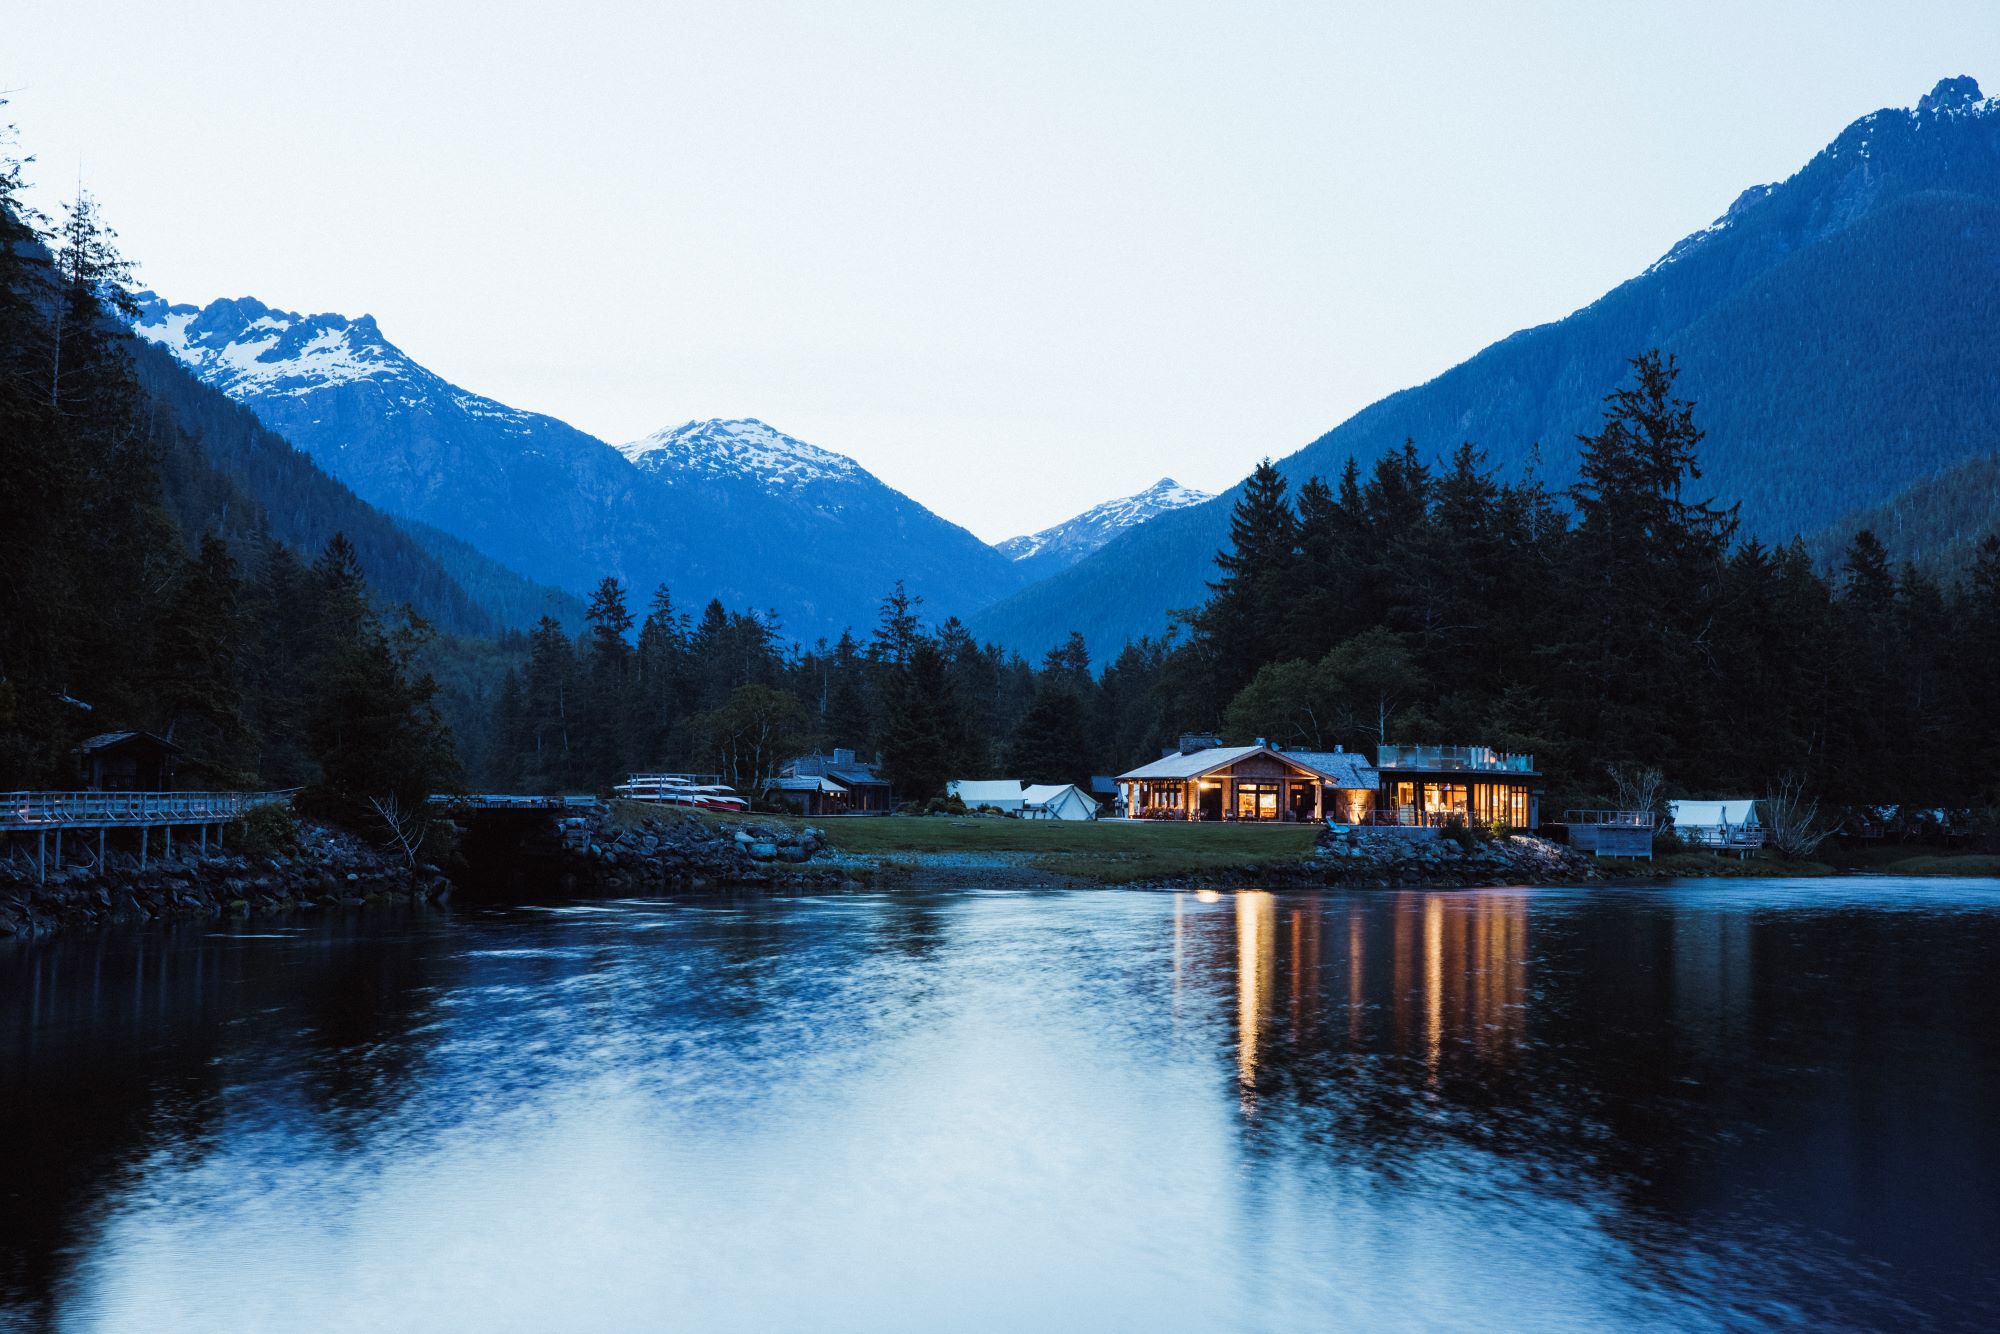 A nighttime view of the Clayoquot Wilderness Lodge. The lights of the lodge are reflected on the water and snowcapped mountains are seen in the distance.